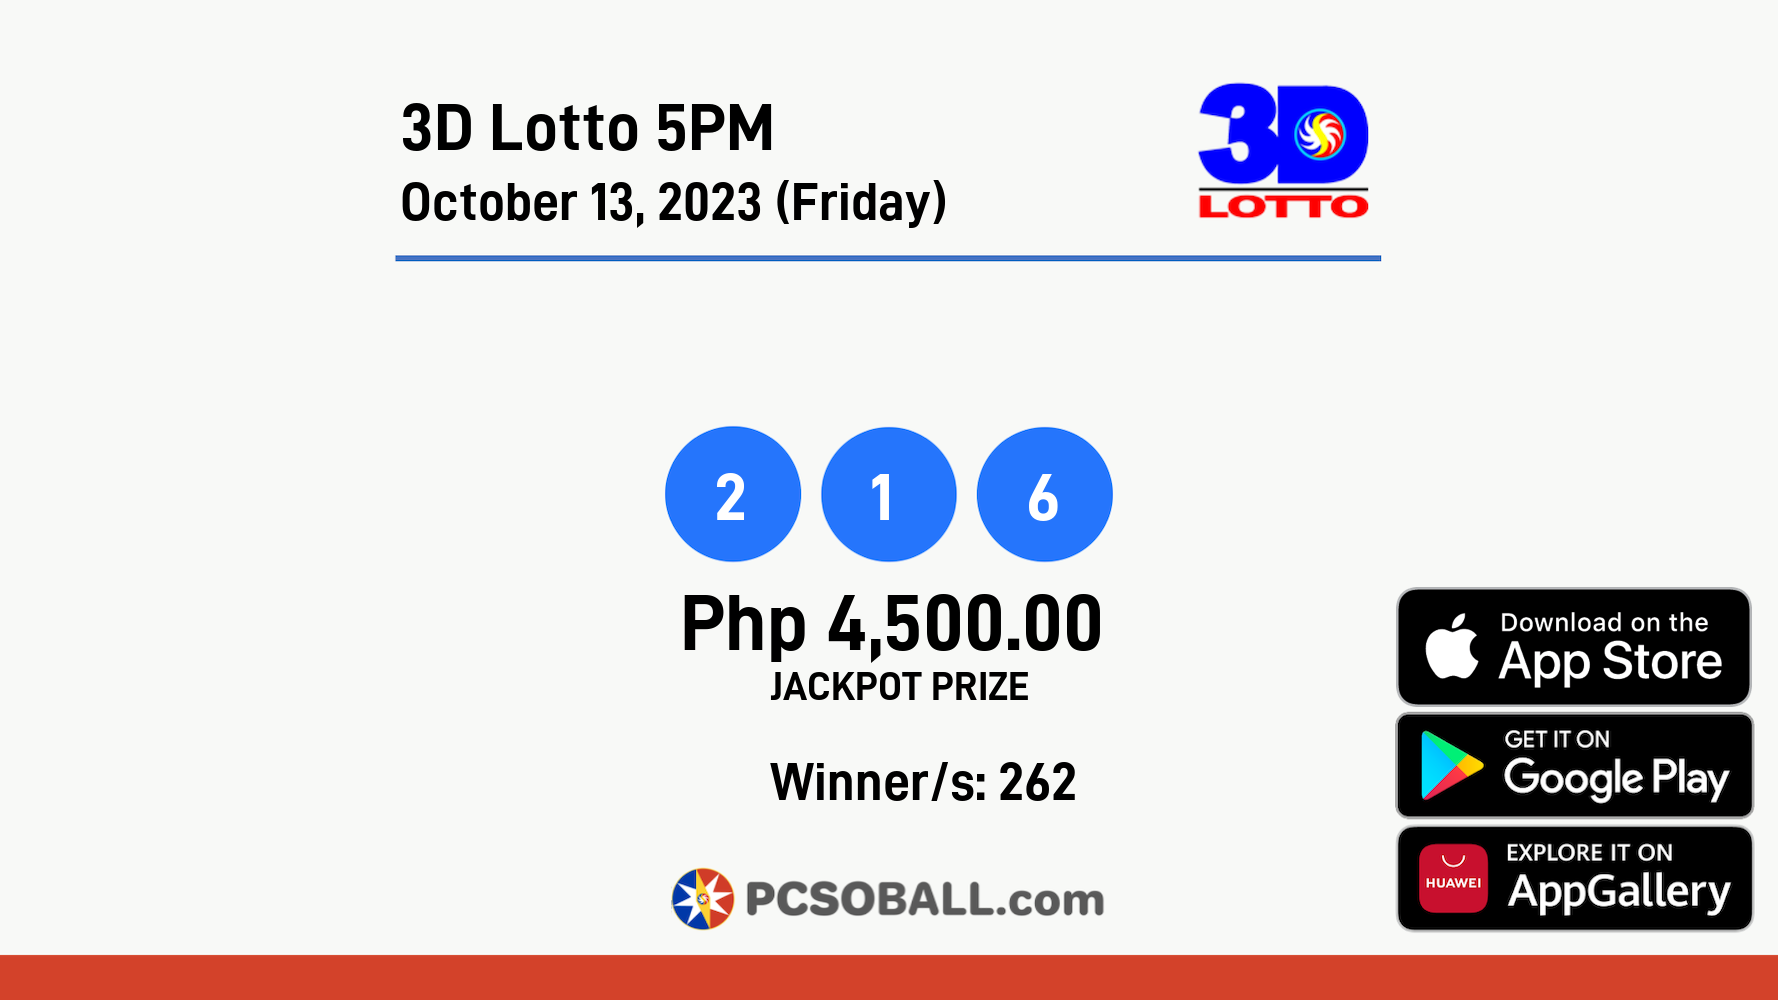 3D Lotto 5PM October 13, 2023 (Friday) Result